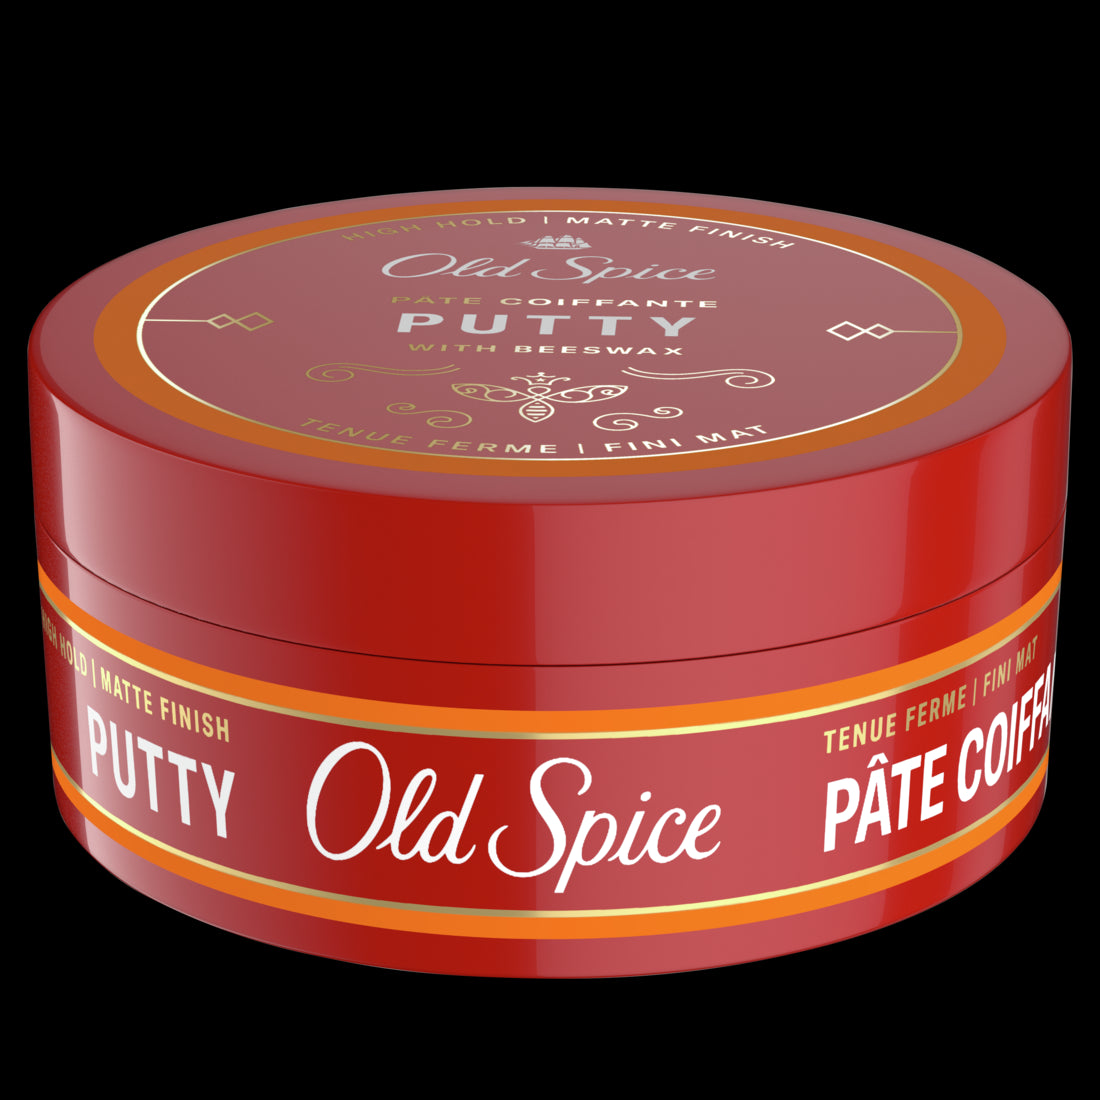 Old Spice Hair Styling Putty for Men, 2.22 oz